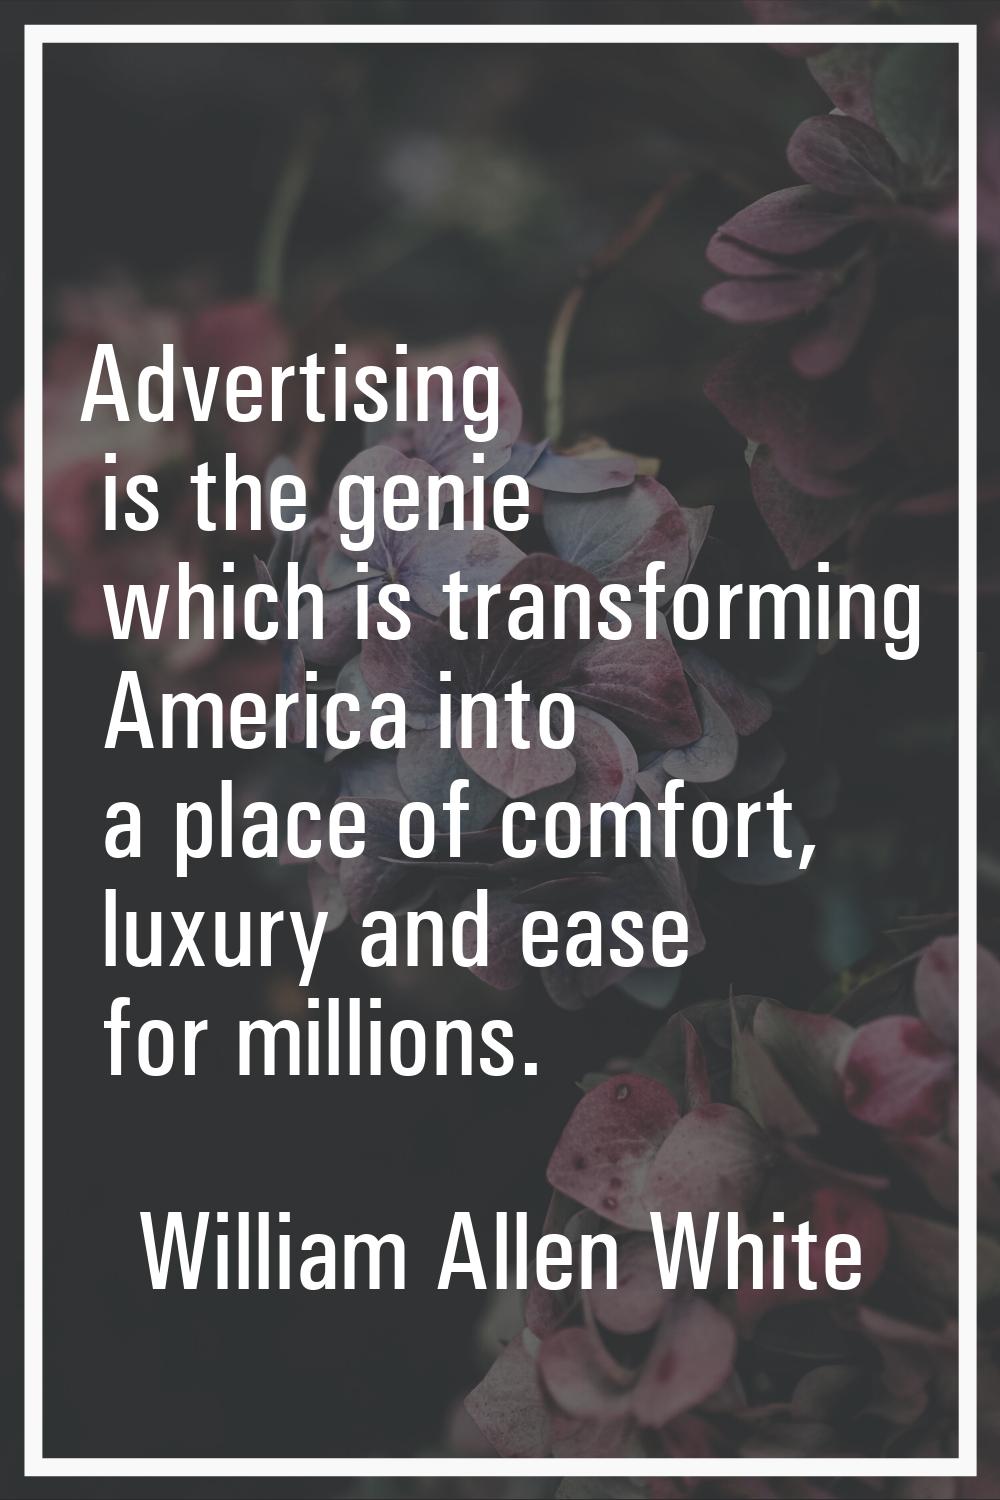 Advertising is the genie which is transforming America into a place of comfort, luxury and ease for